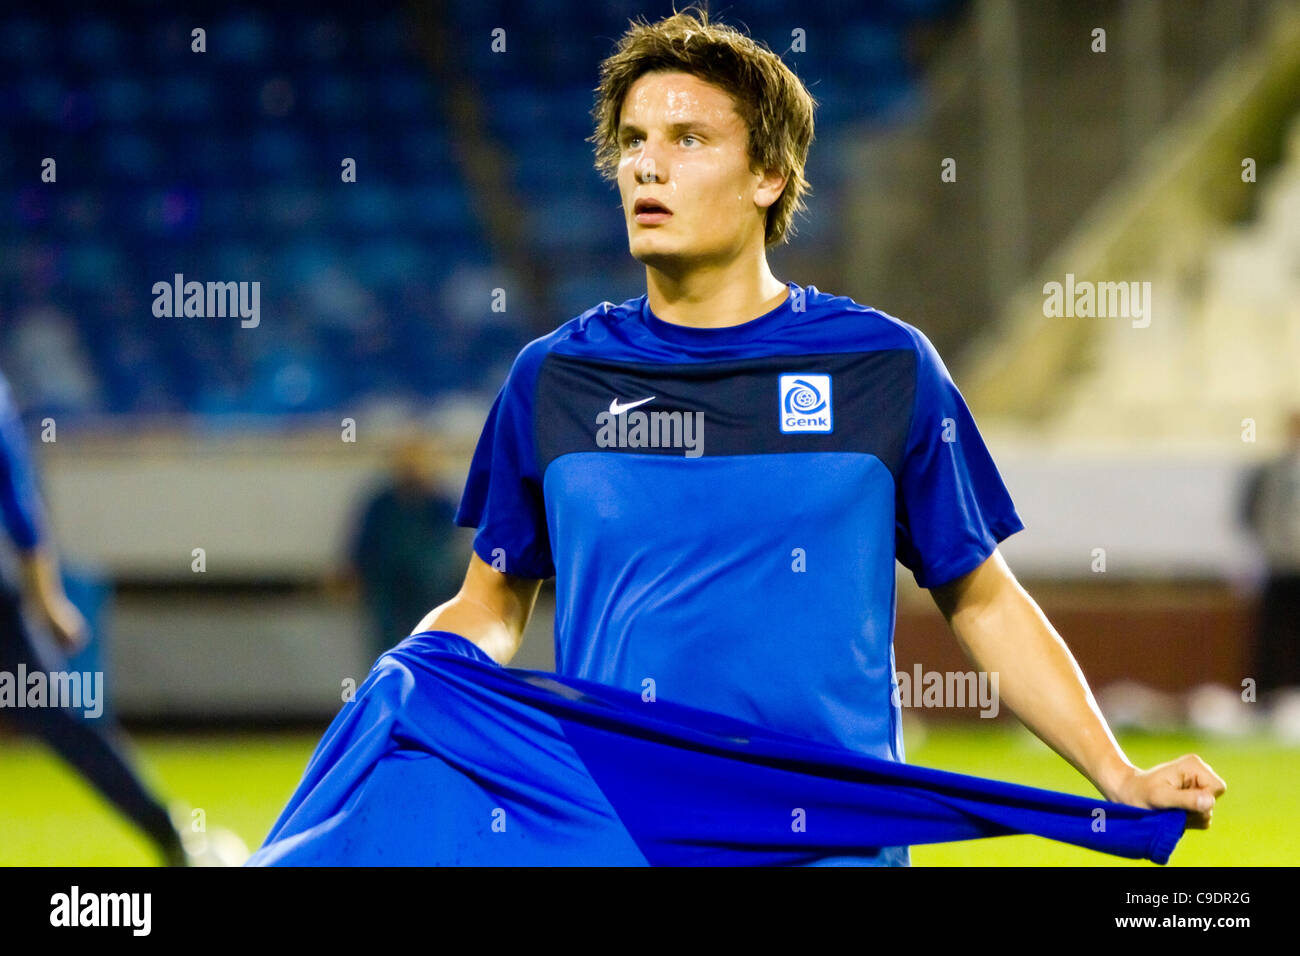 23/11/2011. Valencia, Spain  Football match between Valencia Club de Futbol and KRC Genk, Matchday 5, E Group, Champions League -------------------------------------  Jelle Vossen striker from KRC Genk, during the warming up Stock Photo